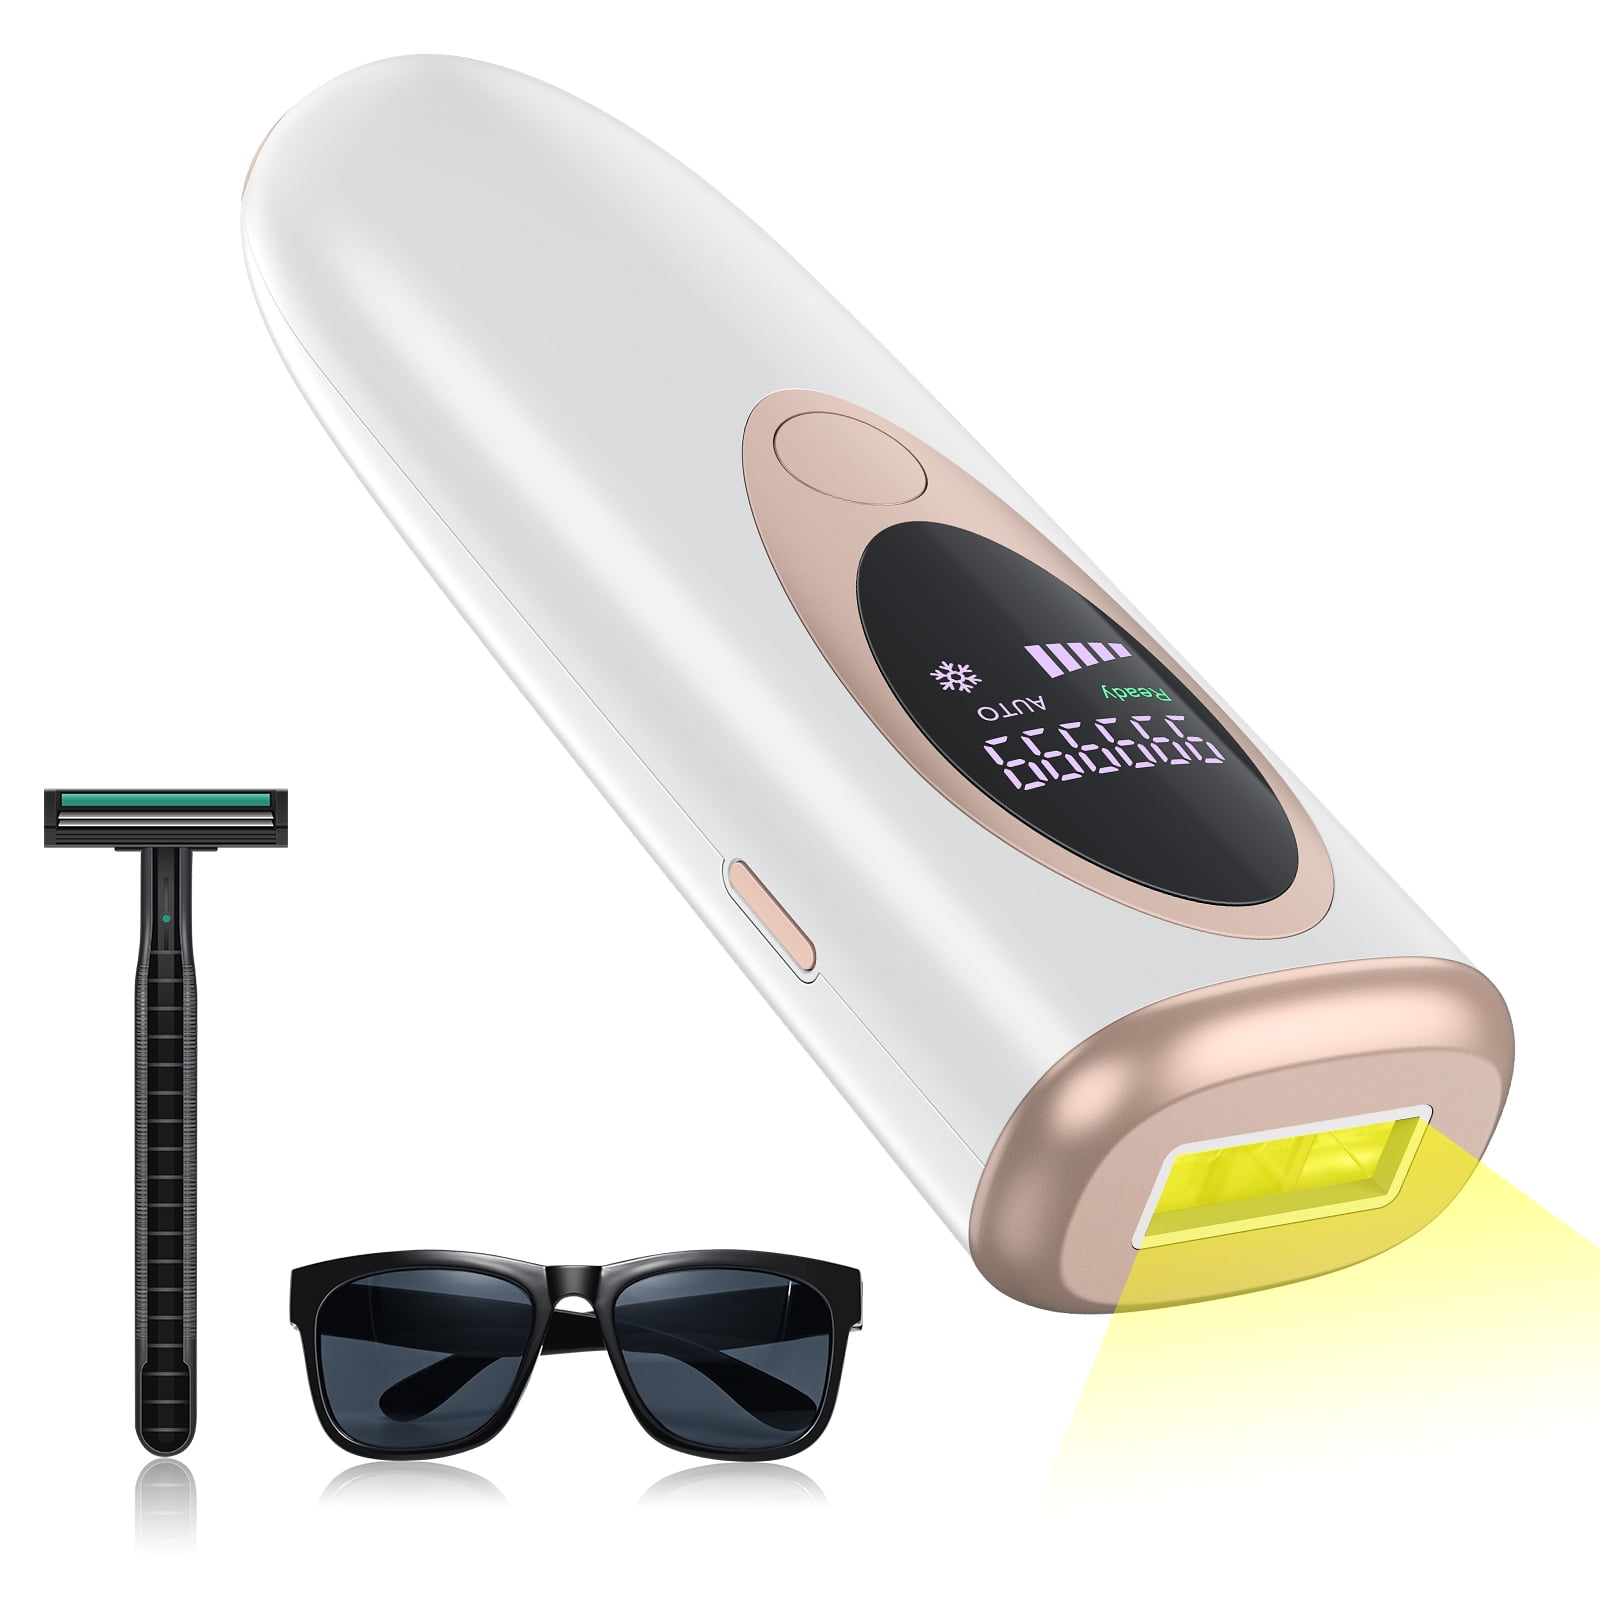 Besunny IPL Laser Hair Removal 999999 Flashes Painless Permanent Hair  Remover for Facial Body Women Men, White 